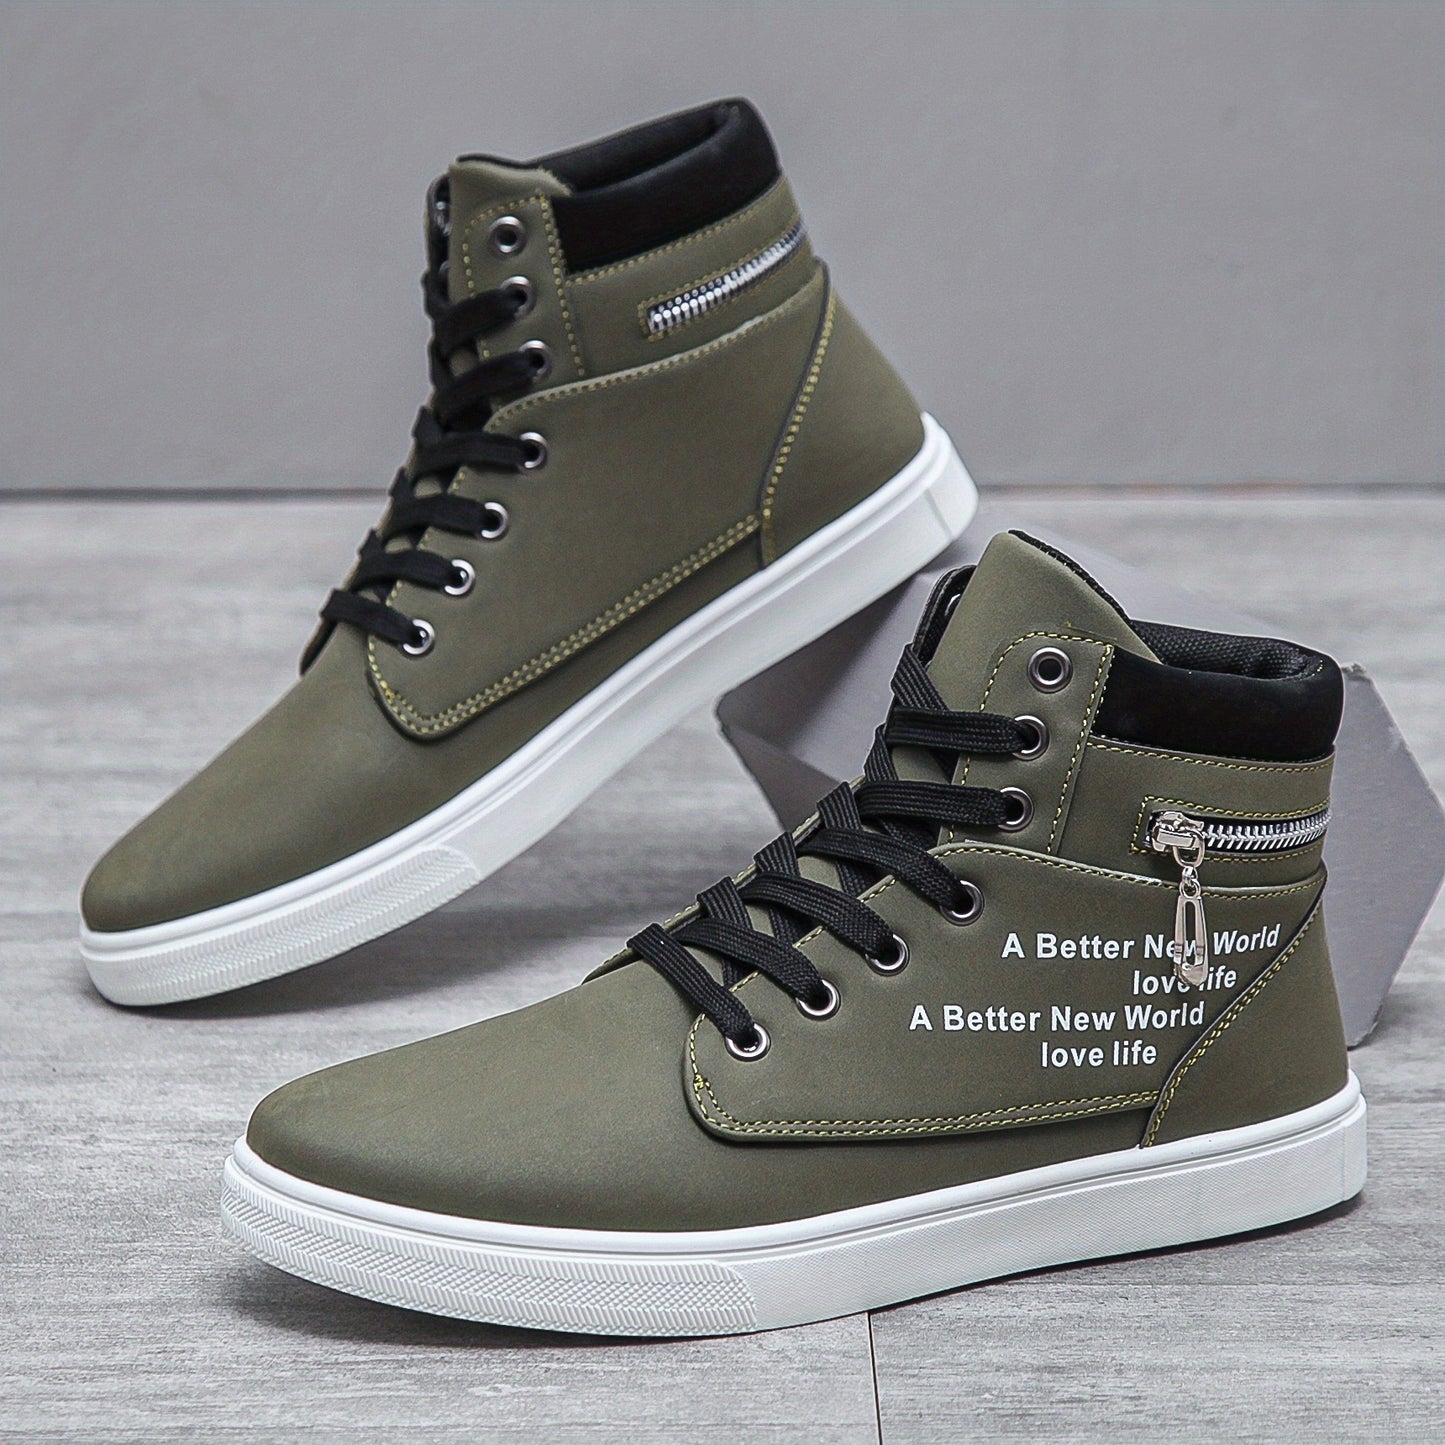 Men's Lace-up Sneakers High Top, Zipper Skate Shoes With Good Traction, Breathable